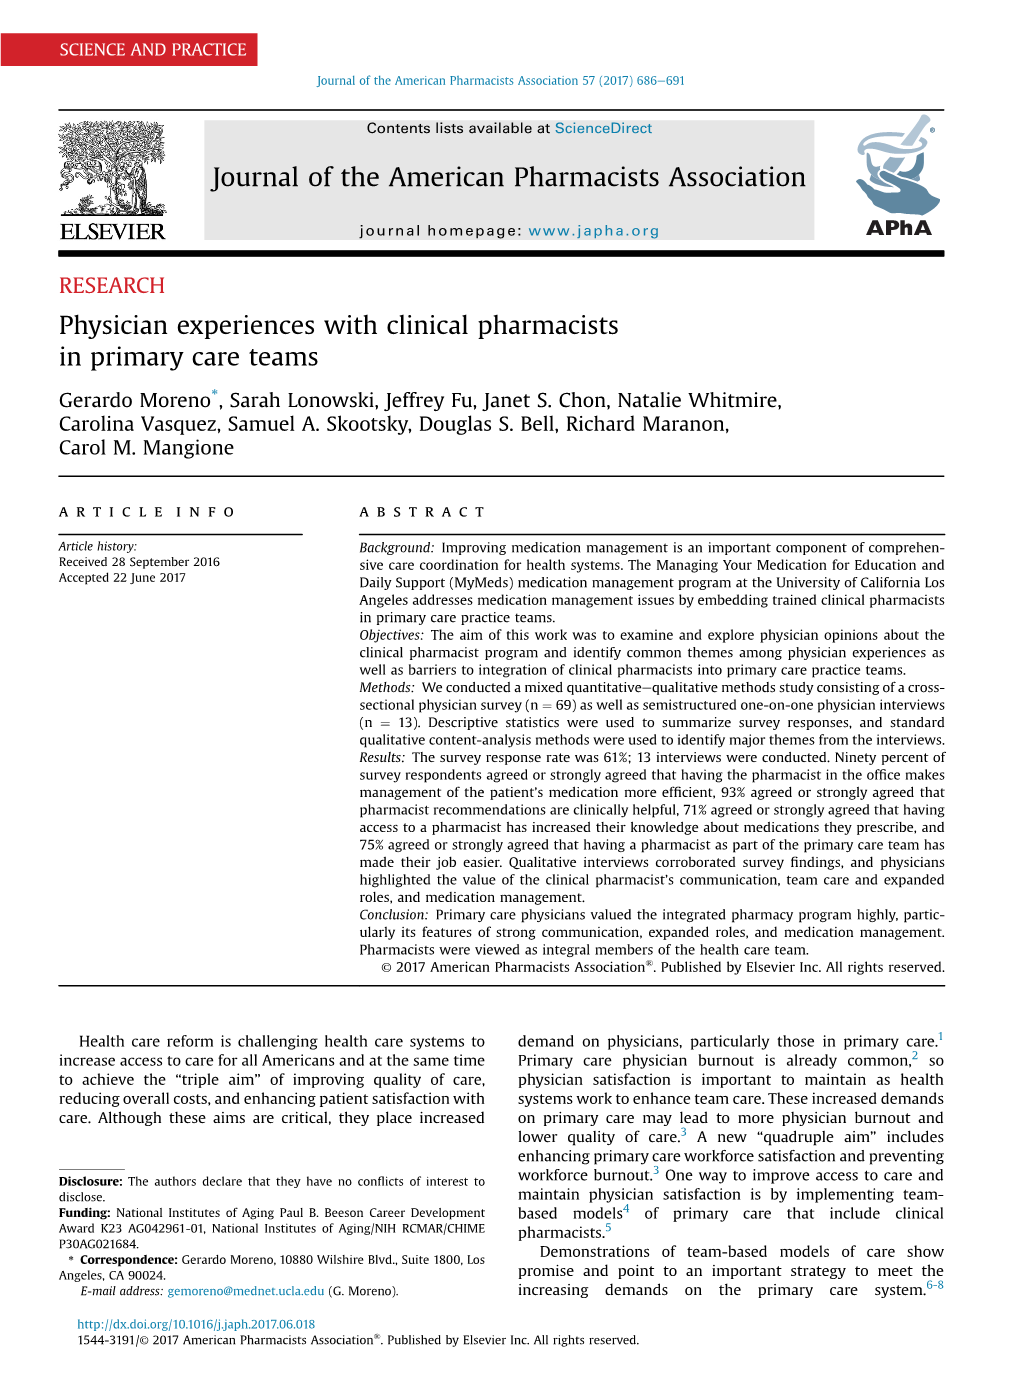 Physician Experiences with Clinical Pharmacists in Primary Care Teams